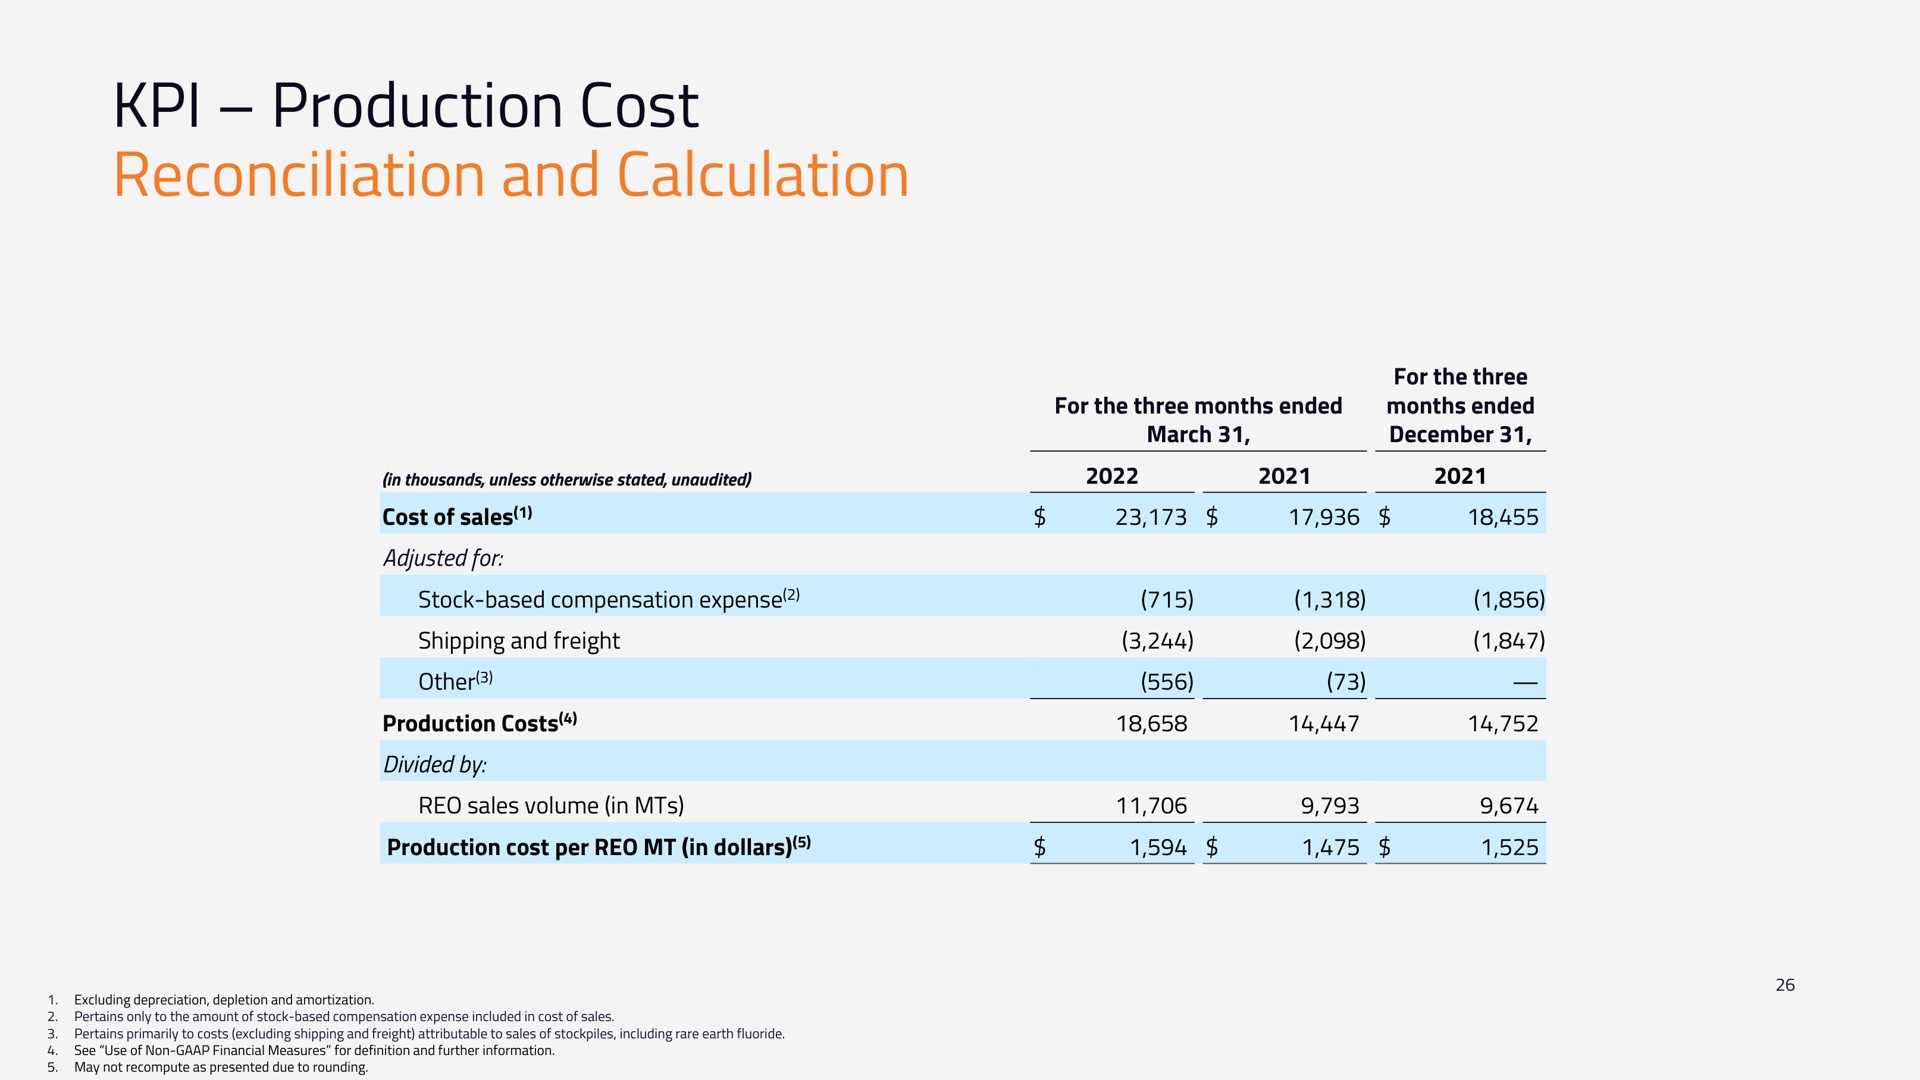 production cost reconciliation and calculation | MP Materials